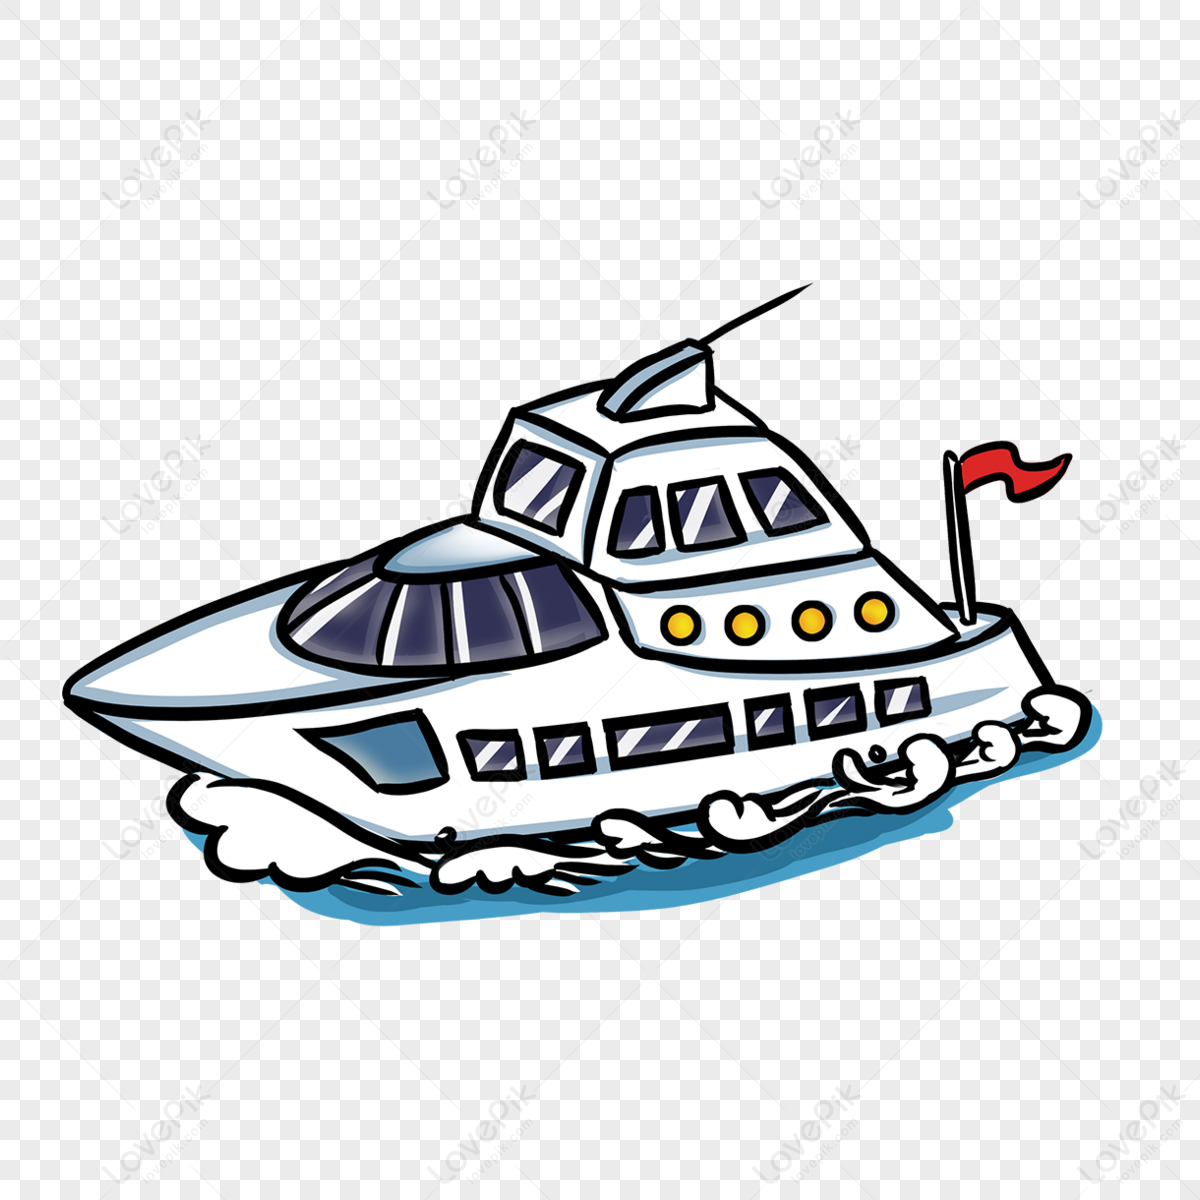 Cartoon style blue yacht ship clipart,steamship,ferry png image